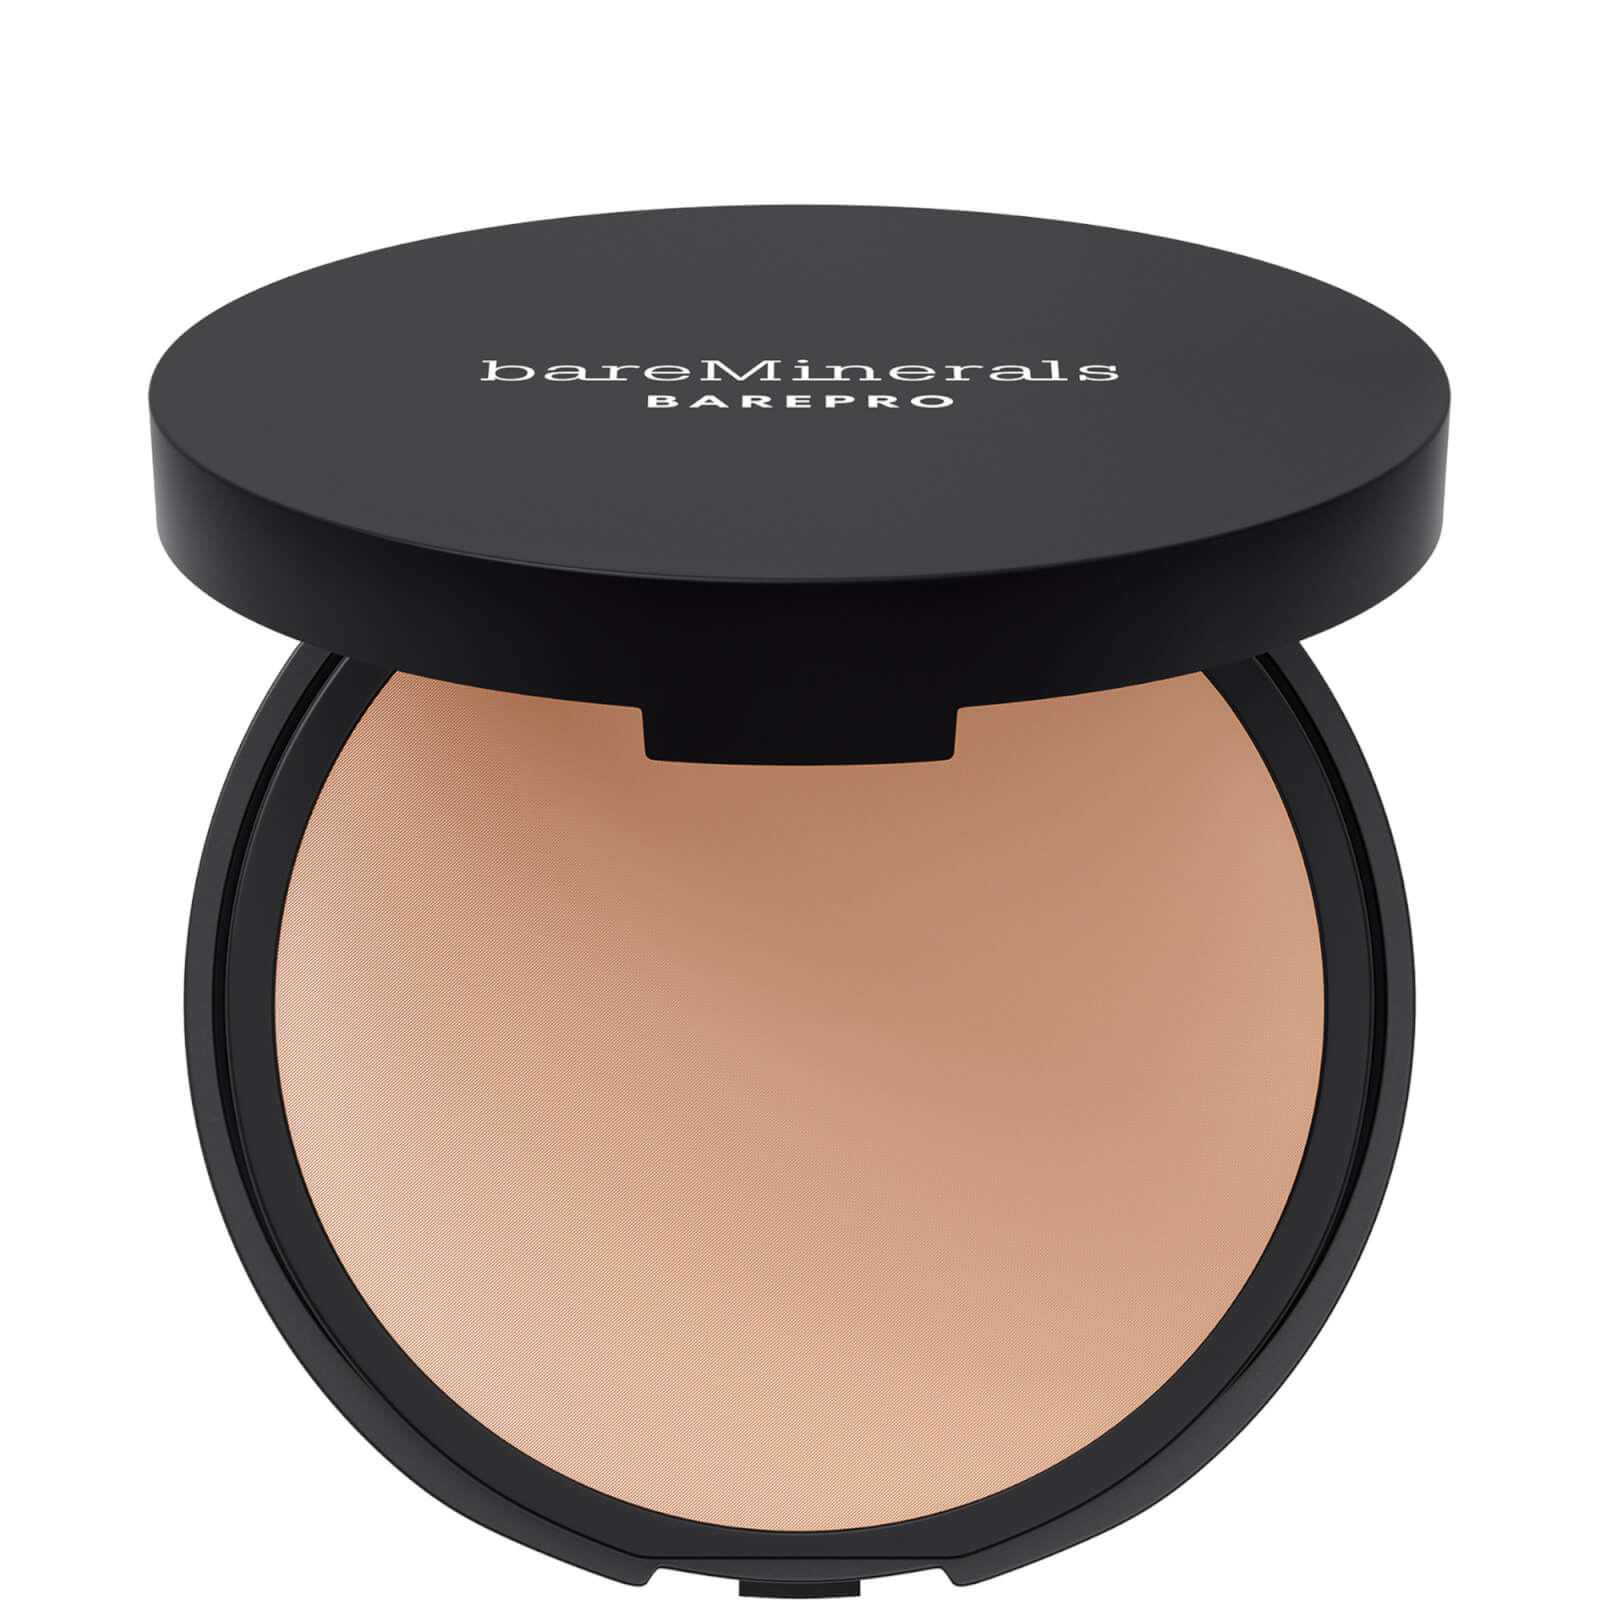 Image of bareMinerals BAREPRO Pressed 16 Hour Foundation 10g (Various Shades) - Light 25 Cool